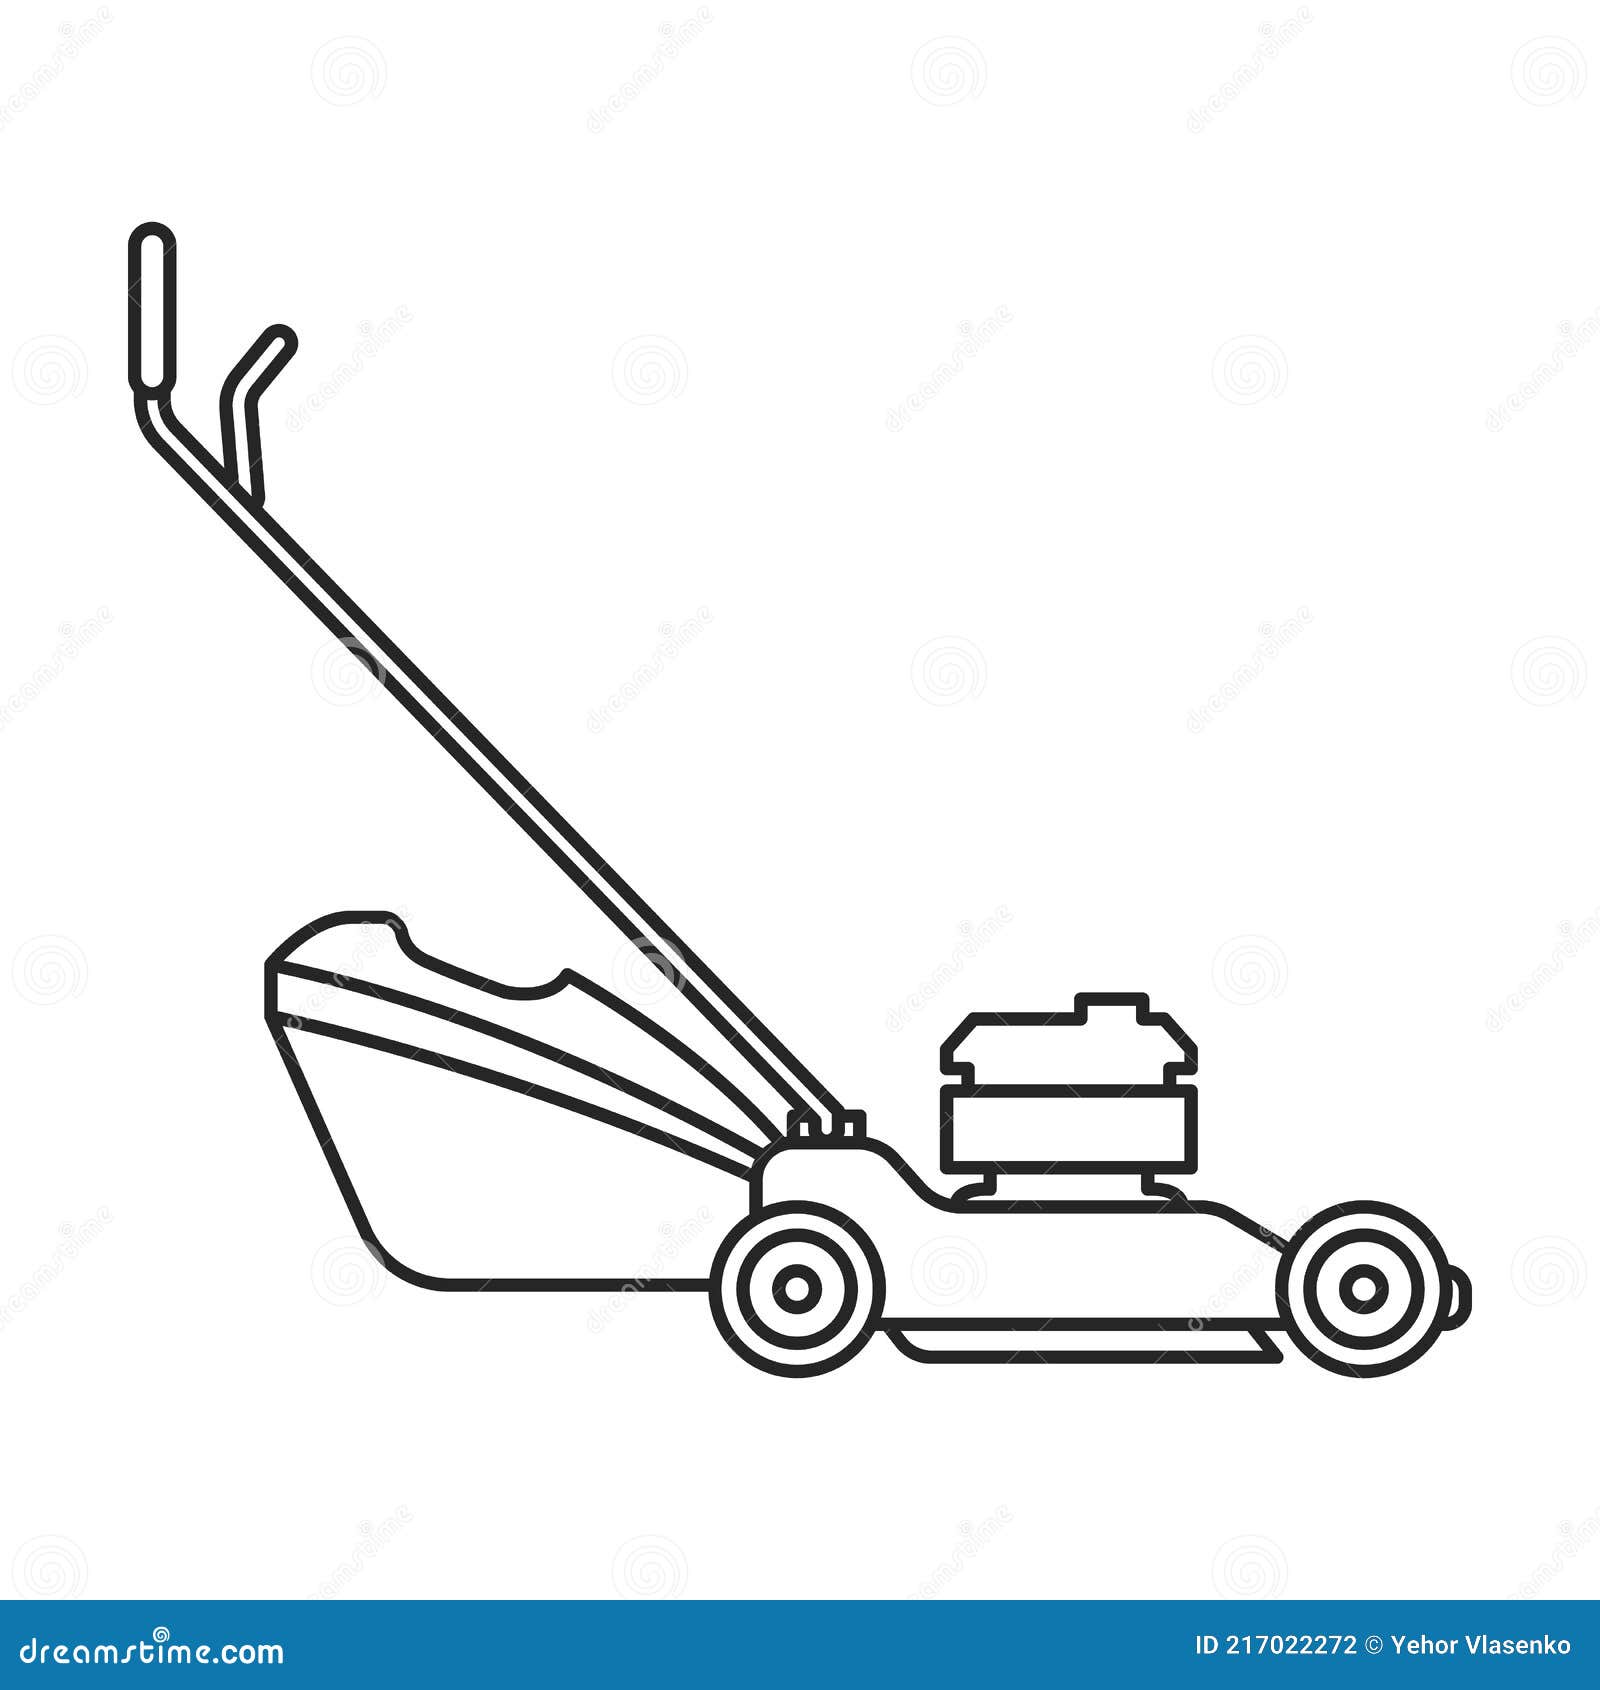 Lawnmower Drawing Lawn Vector Images over 750